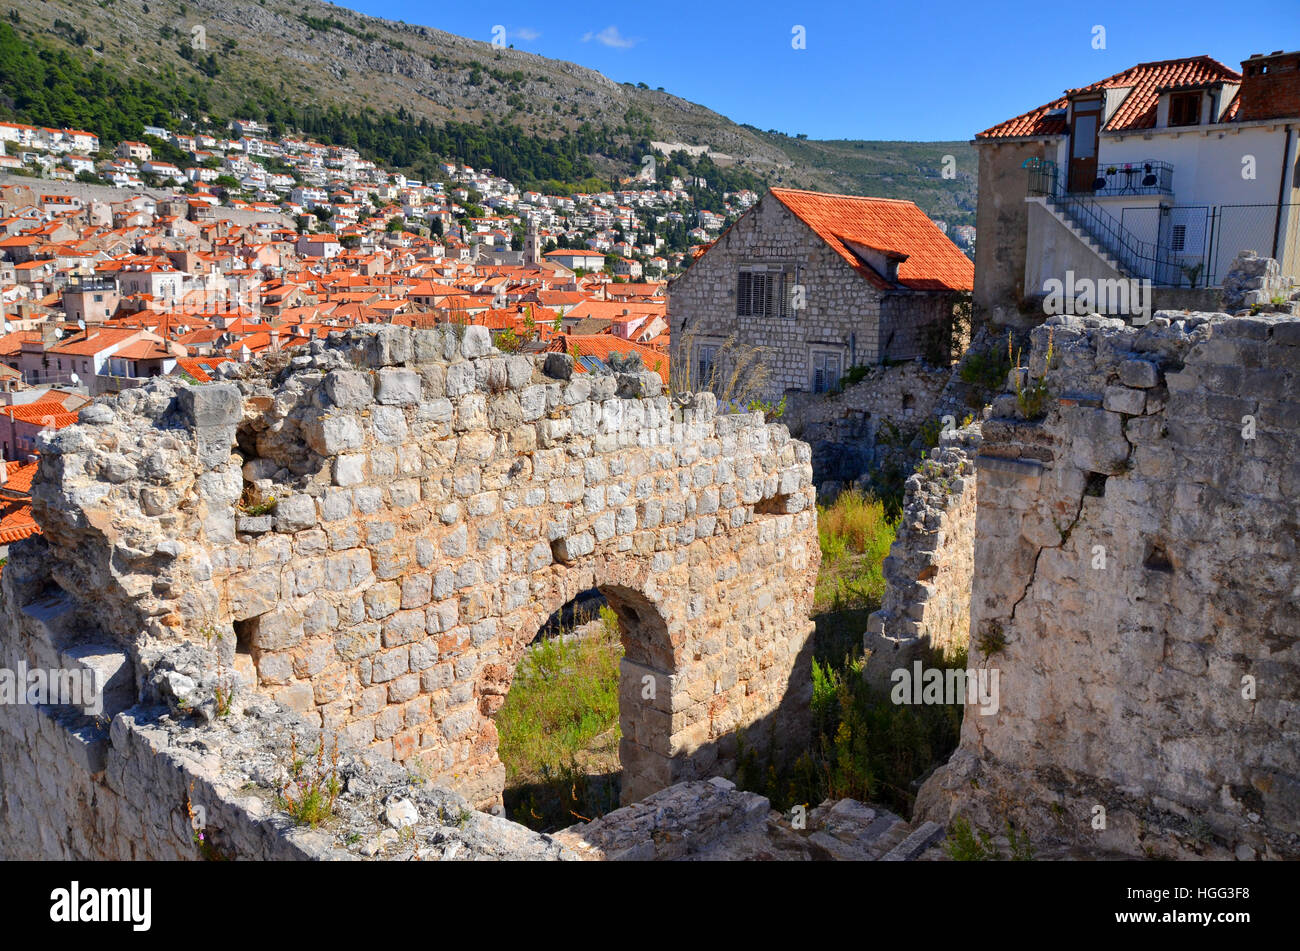 old, new houses, rebuilt, re-roofed, war,Dubrovnik Stock Photo